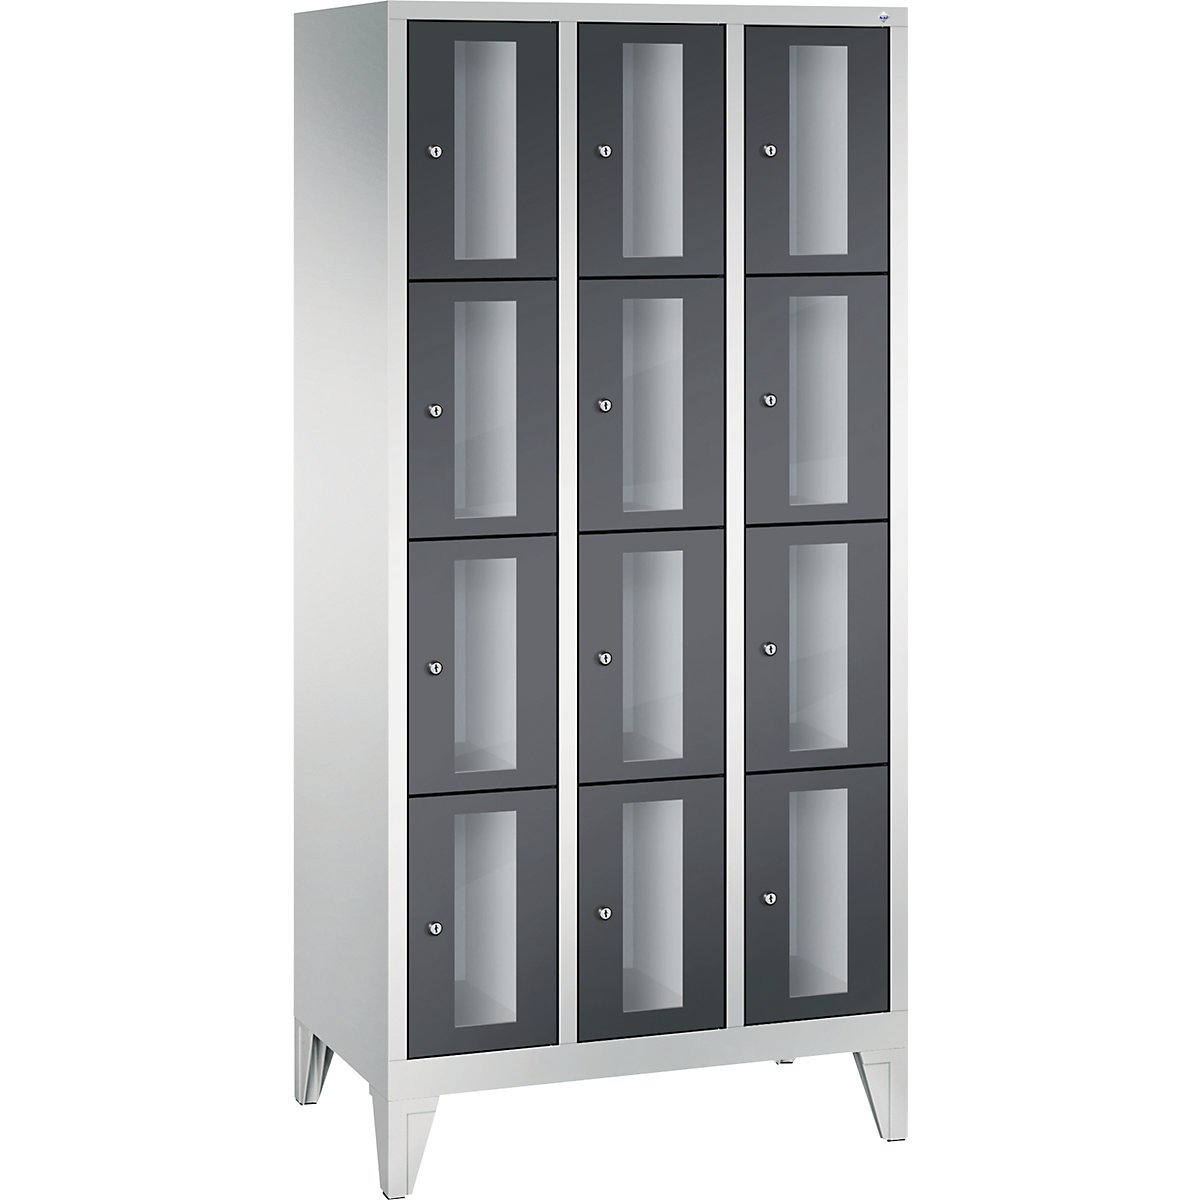 C+P – CLASSIC locker unit, compartment height 375 mm, with feet, 12 compartments, width 900 mm, black grey door